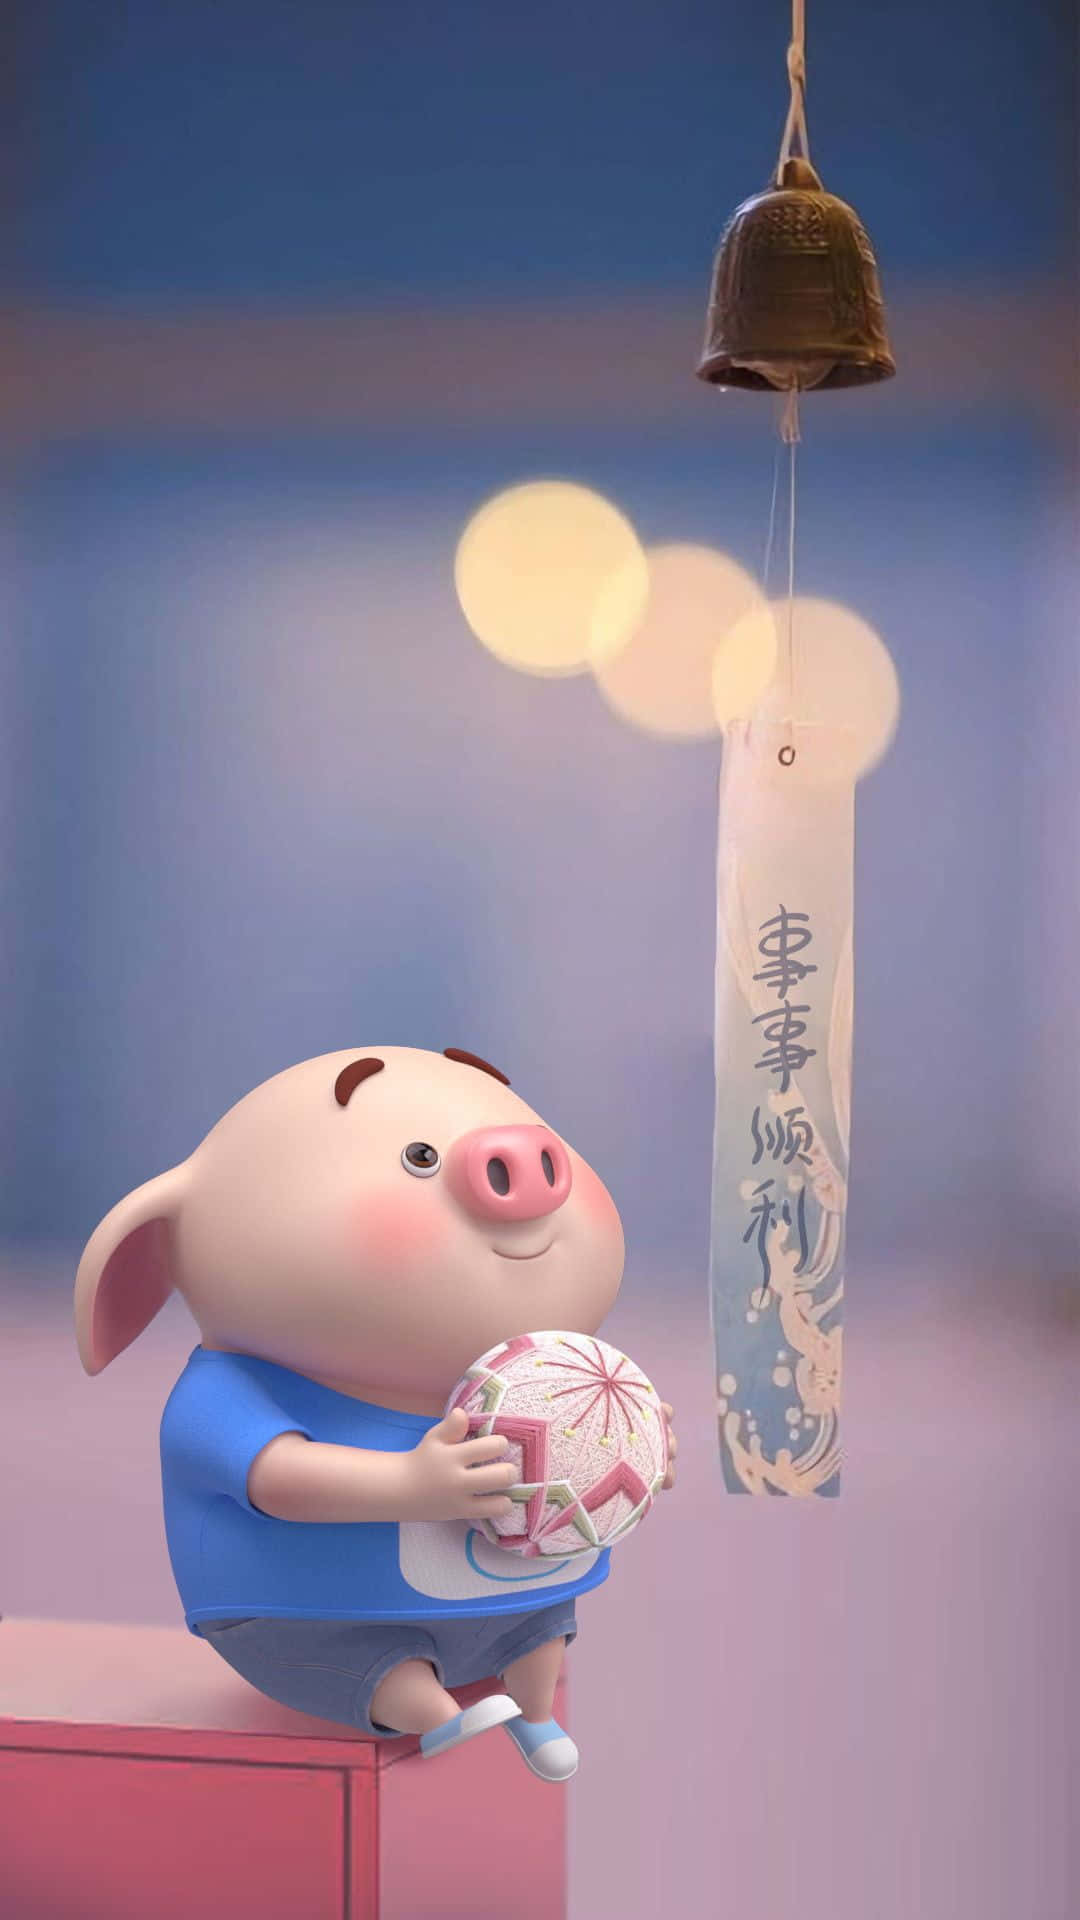 A Pig Holding A Bell And A Bell